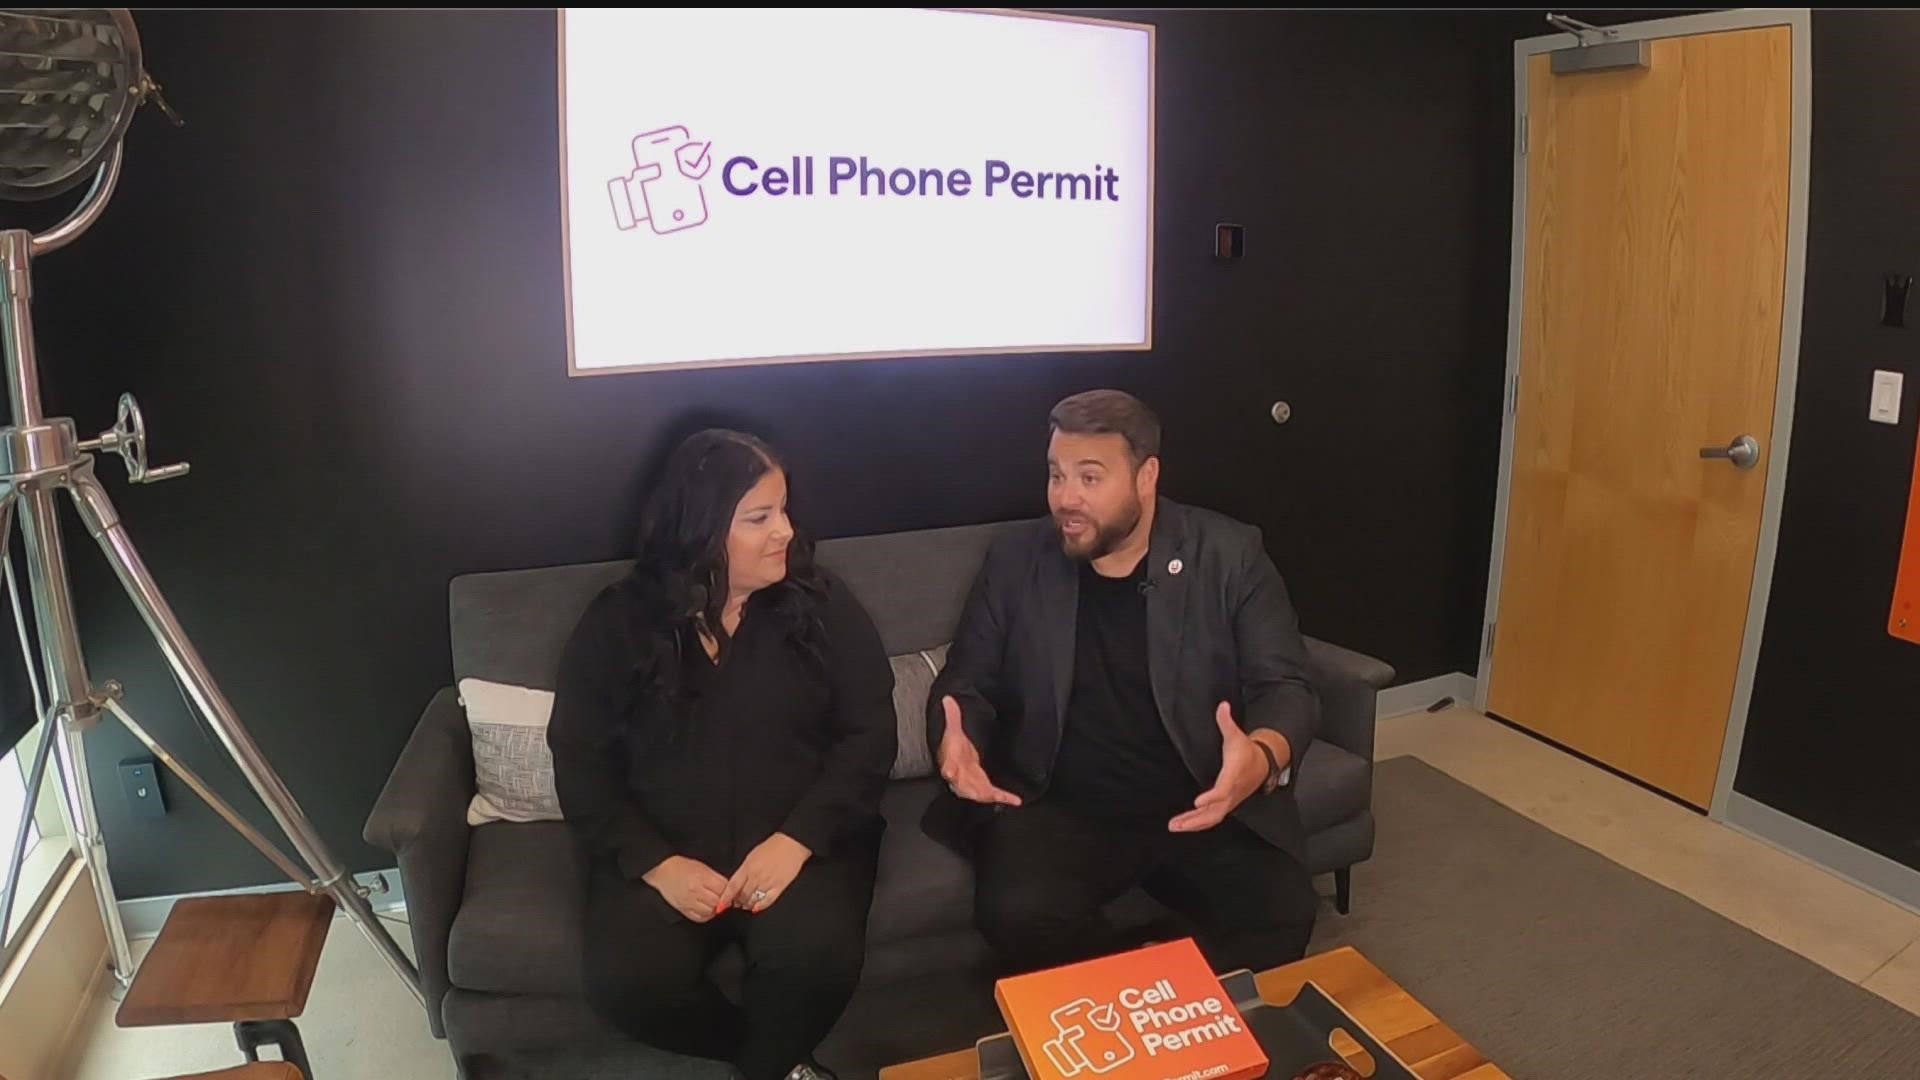 After learning the teen shooter in Uvalde showed warning signs, a local couple now urges families to check out a resource they created called Cell Phone Permit.